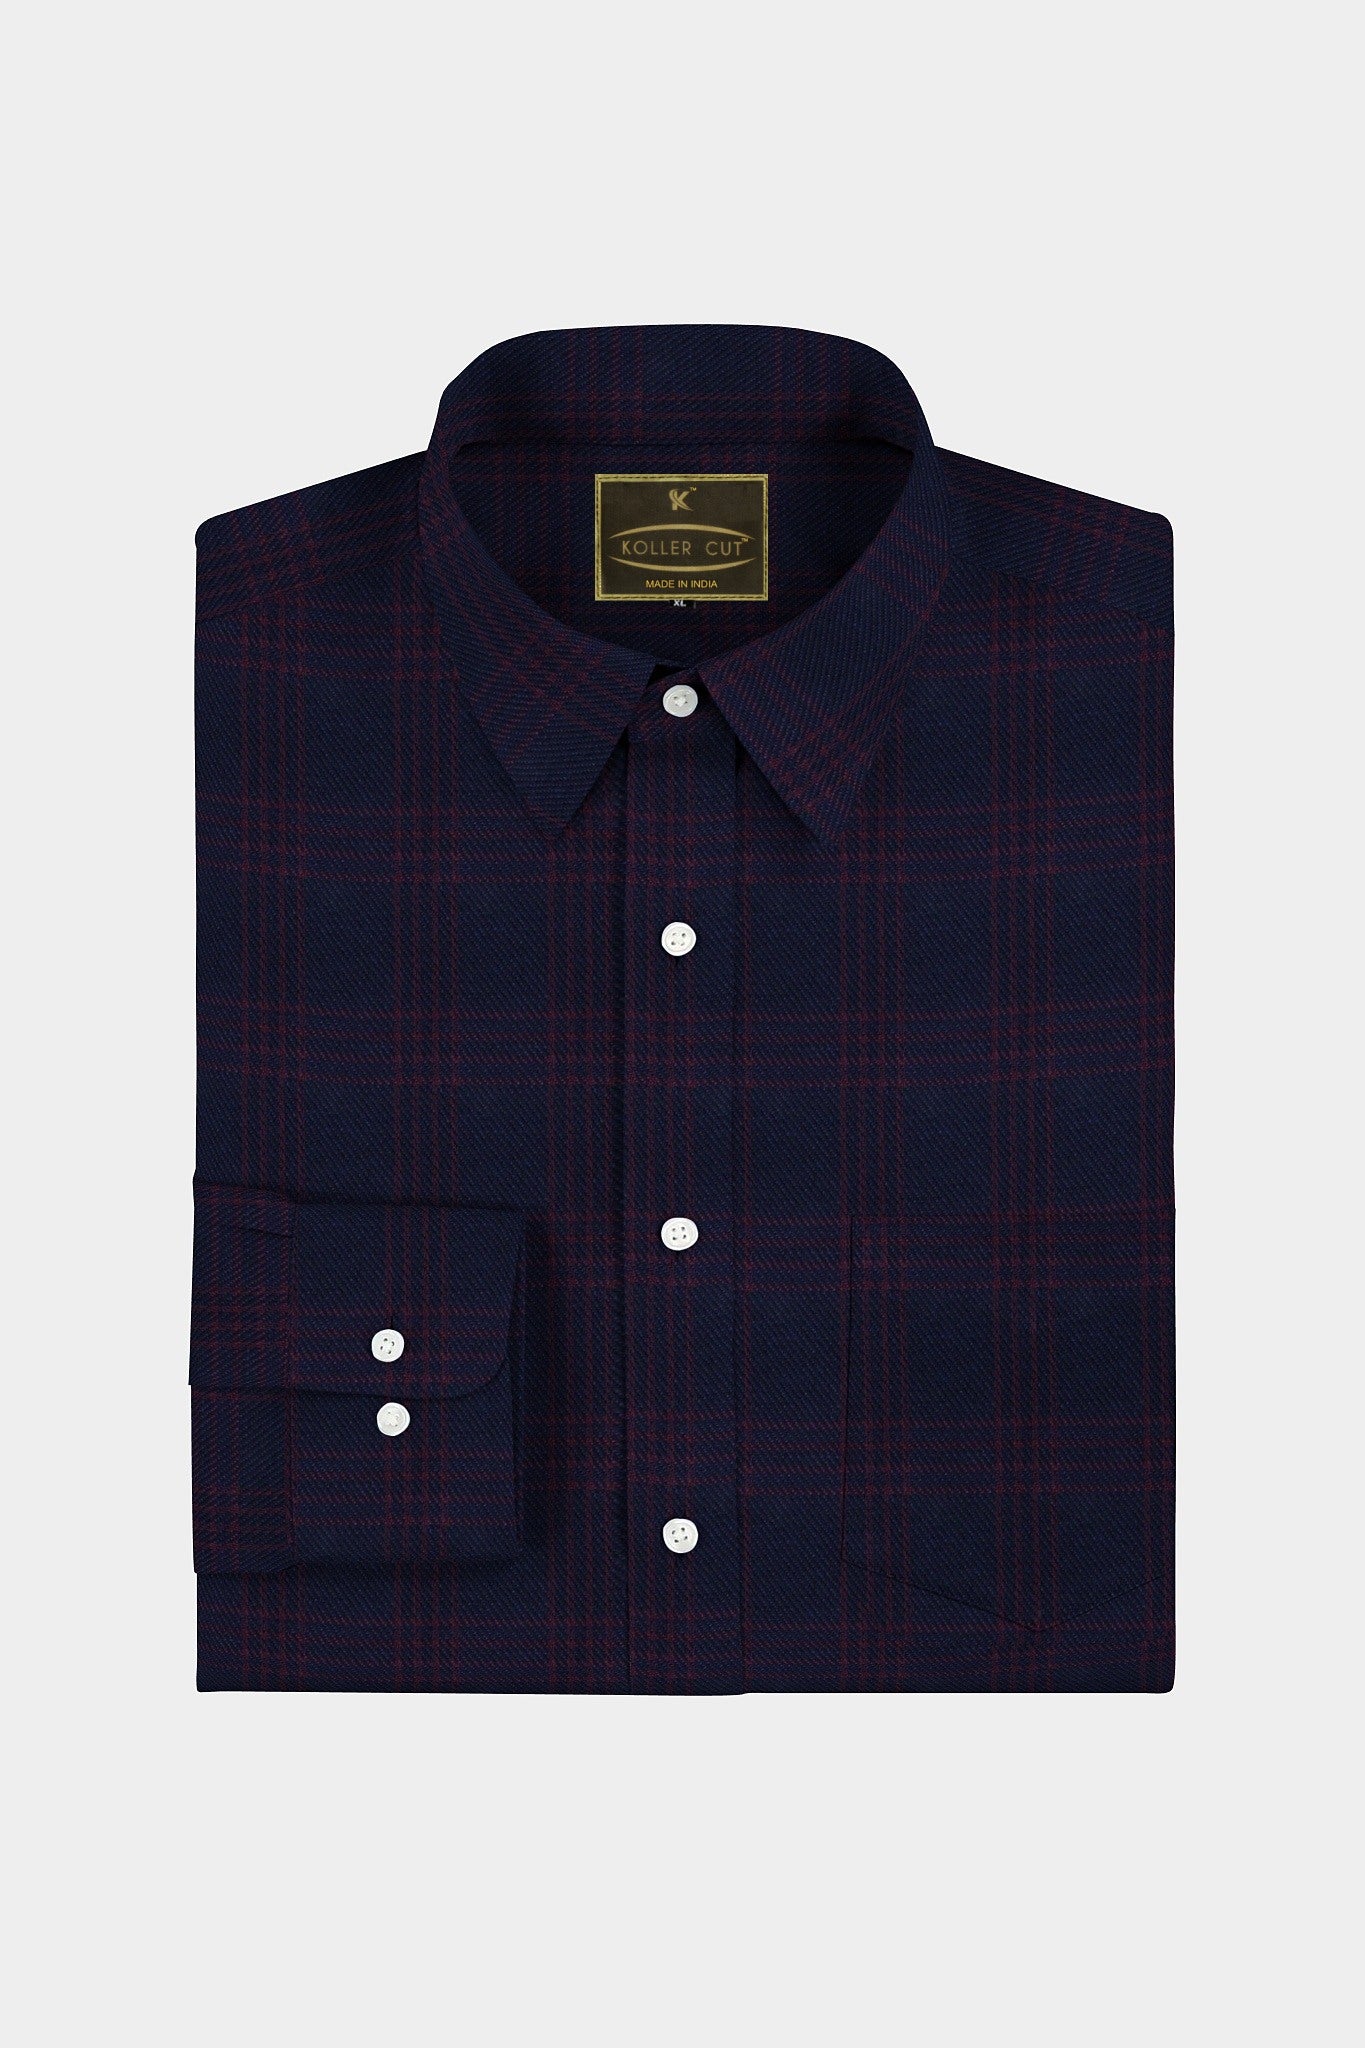 Midnight Blue with Berry Red Plaid Cotton Shirt